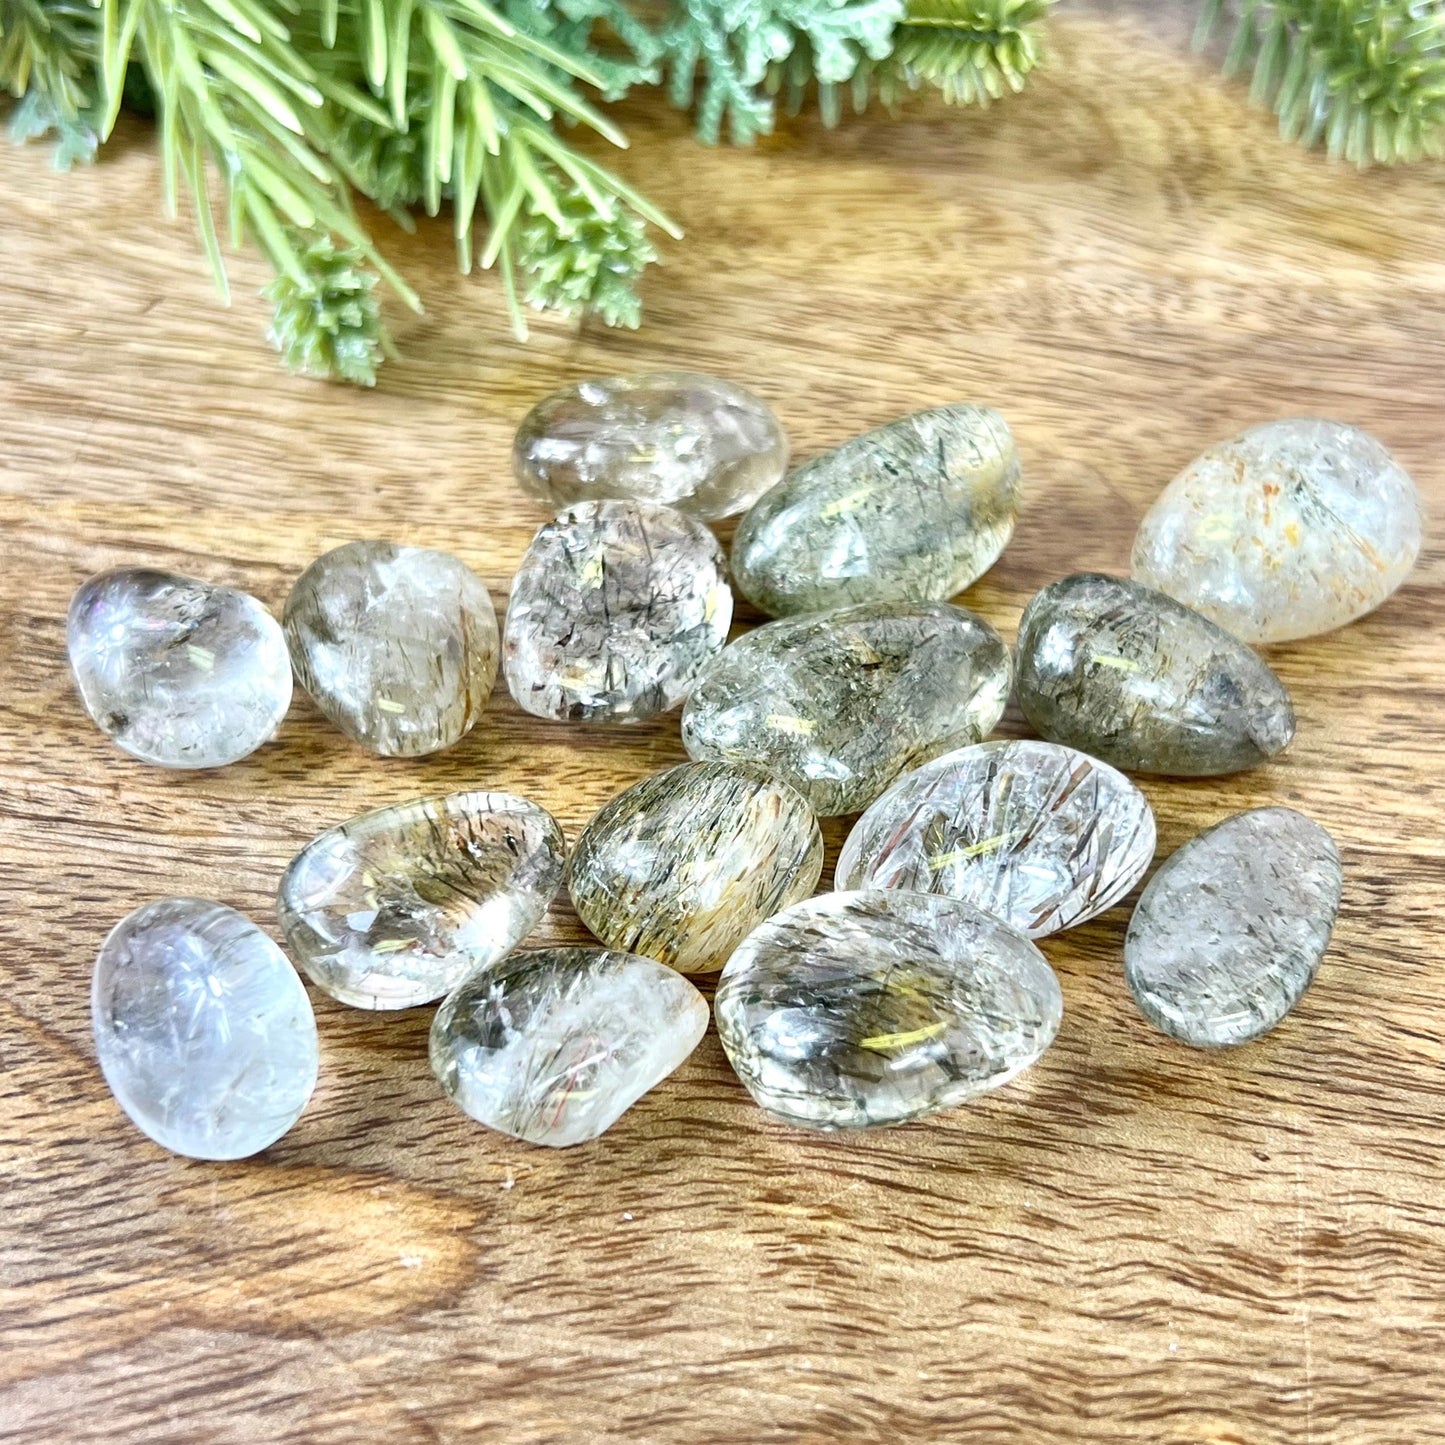 Green Tourmaline in Clear Quartz Tumbled Crystal - You get one